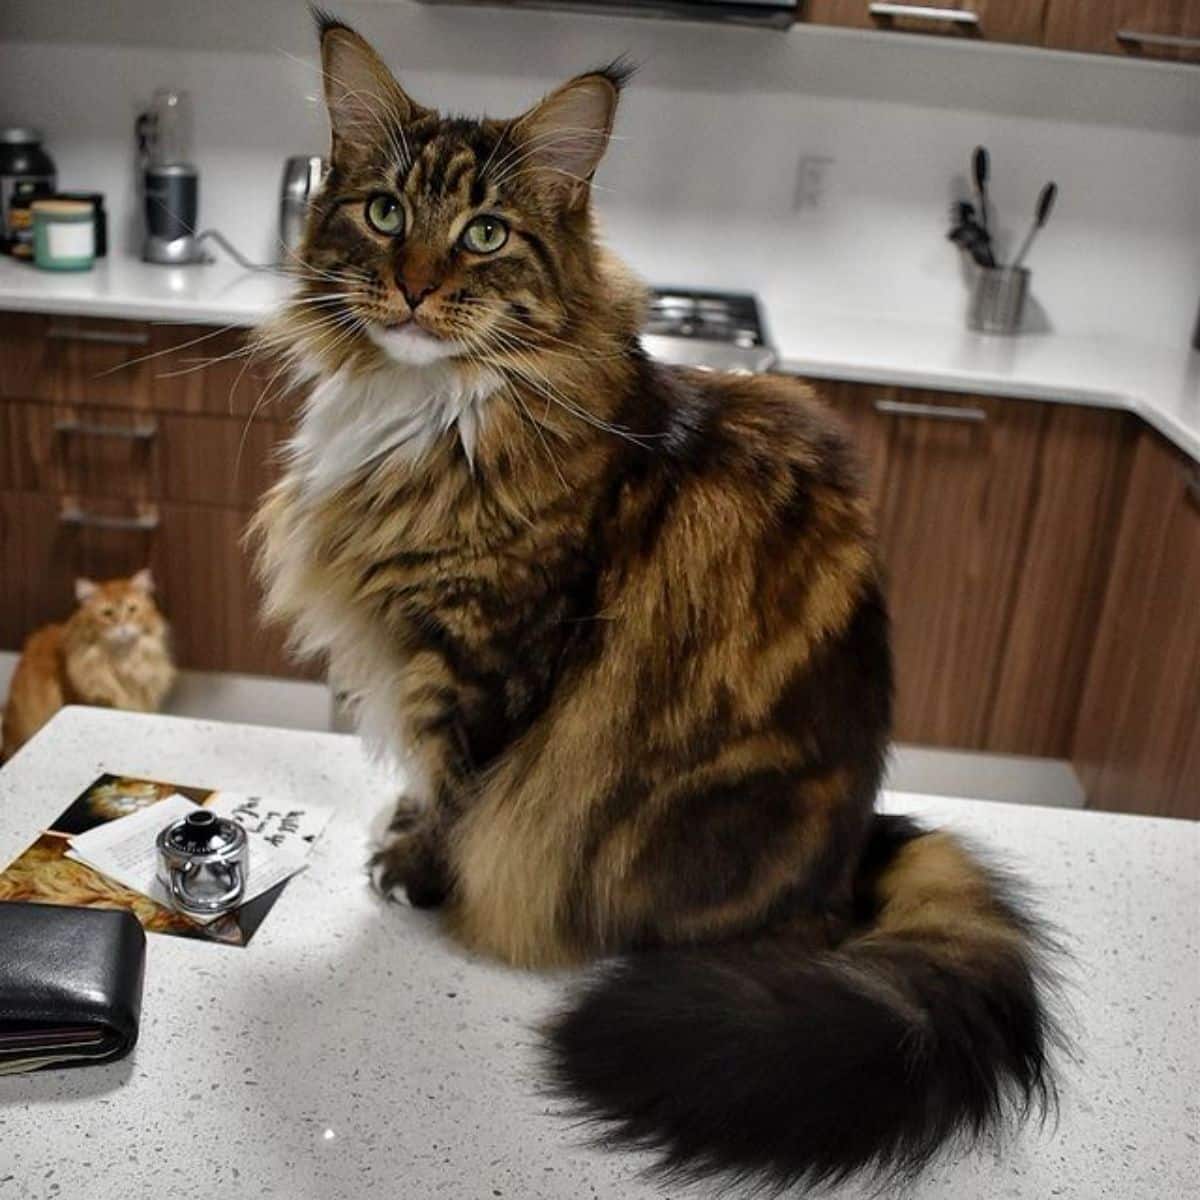 A fluffy tabby maine coon sitting on a countertop.